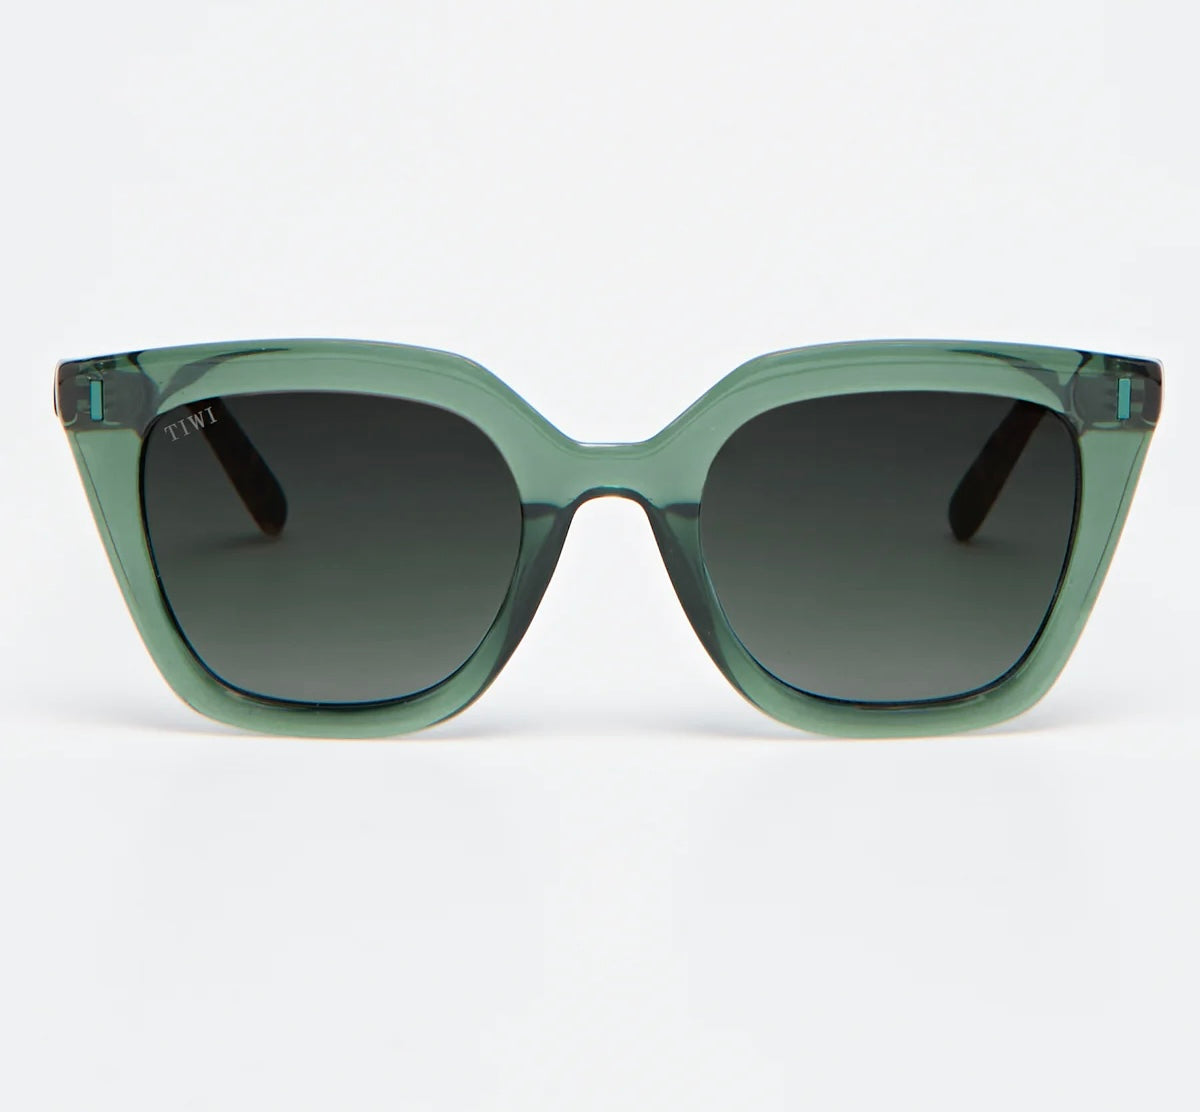 HALE Sunglasses Available in more colors Green/Tortoise Temples  